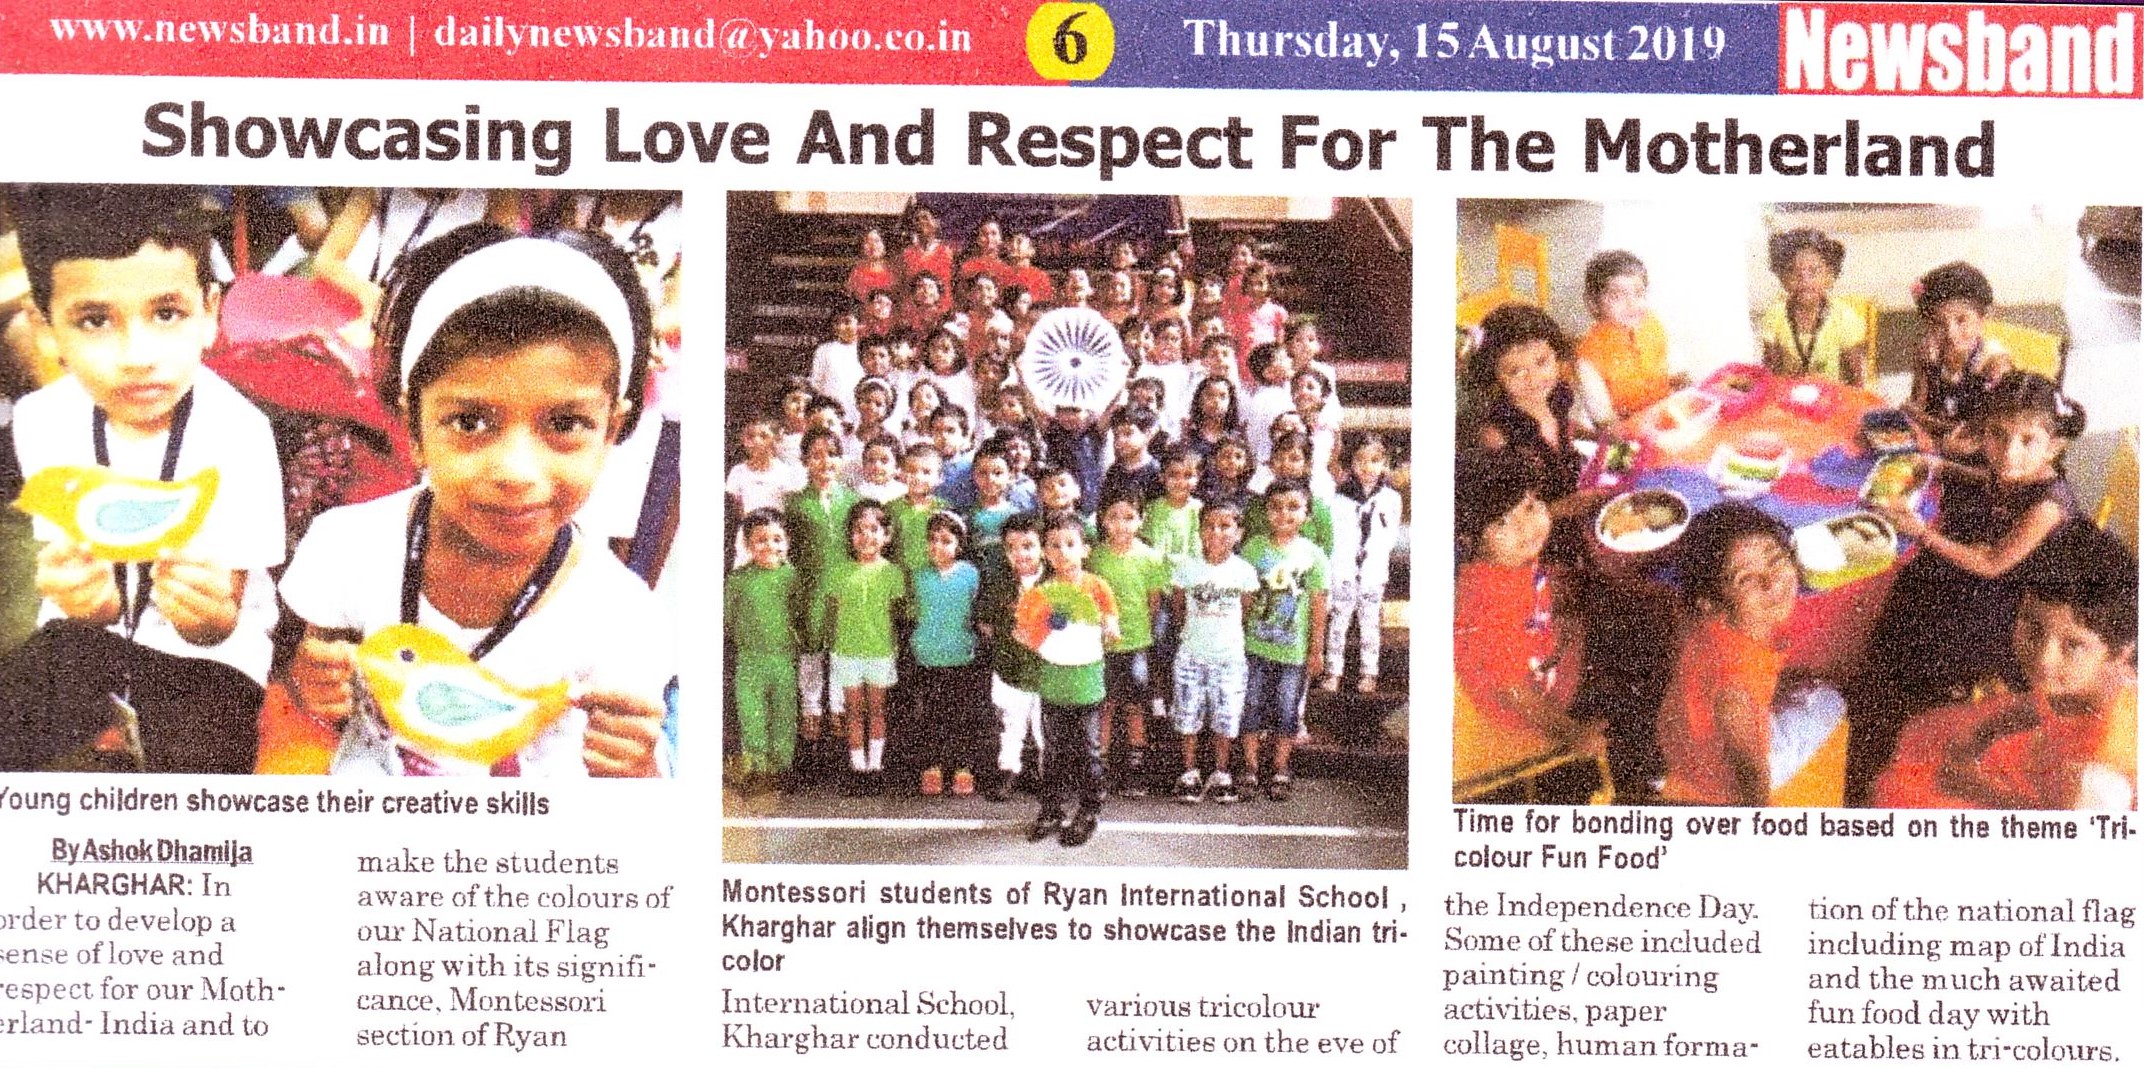 Showcasing love and respect for the motherland was mentioned in News band - Ryan International School, Kharghar